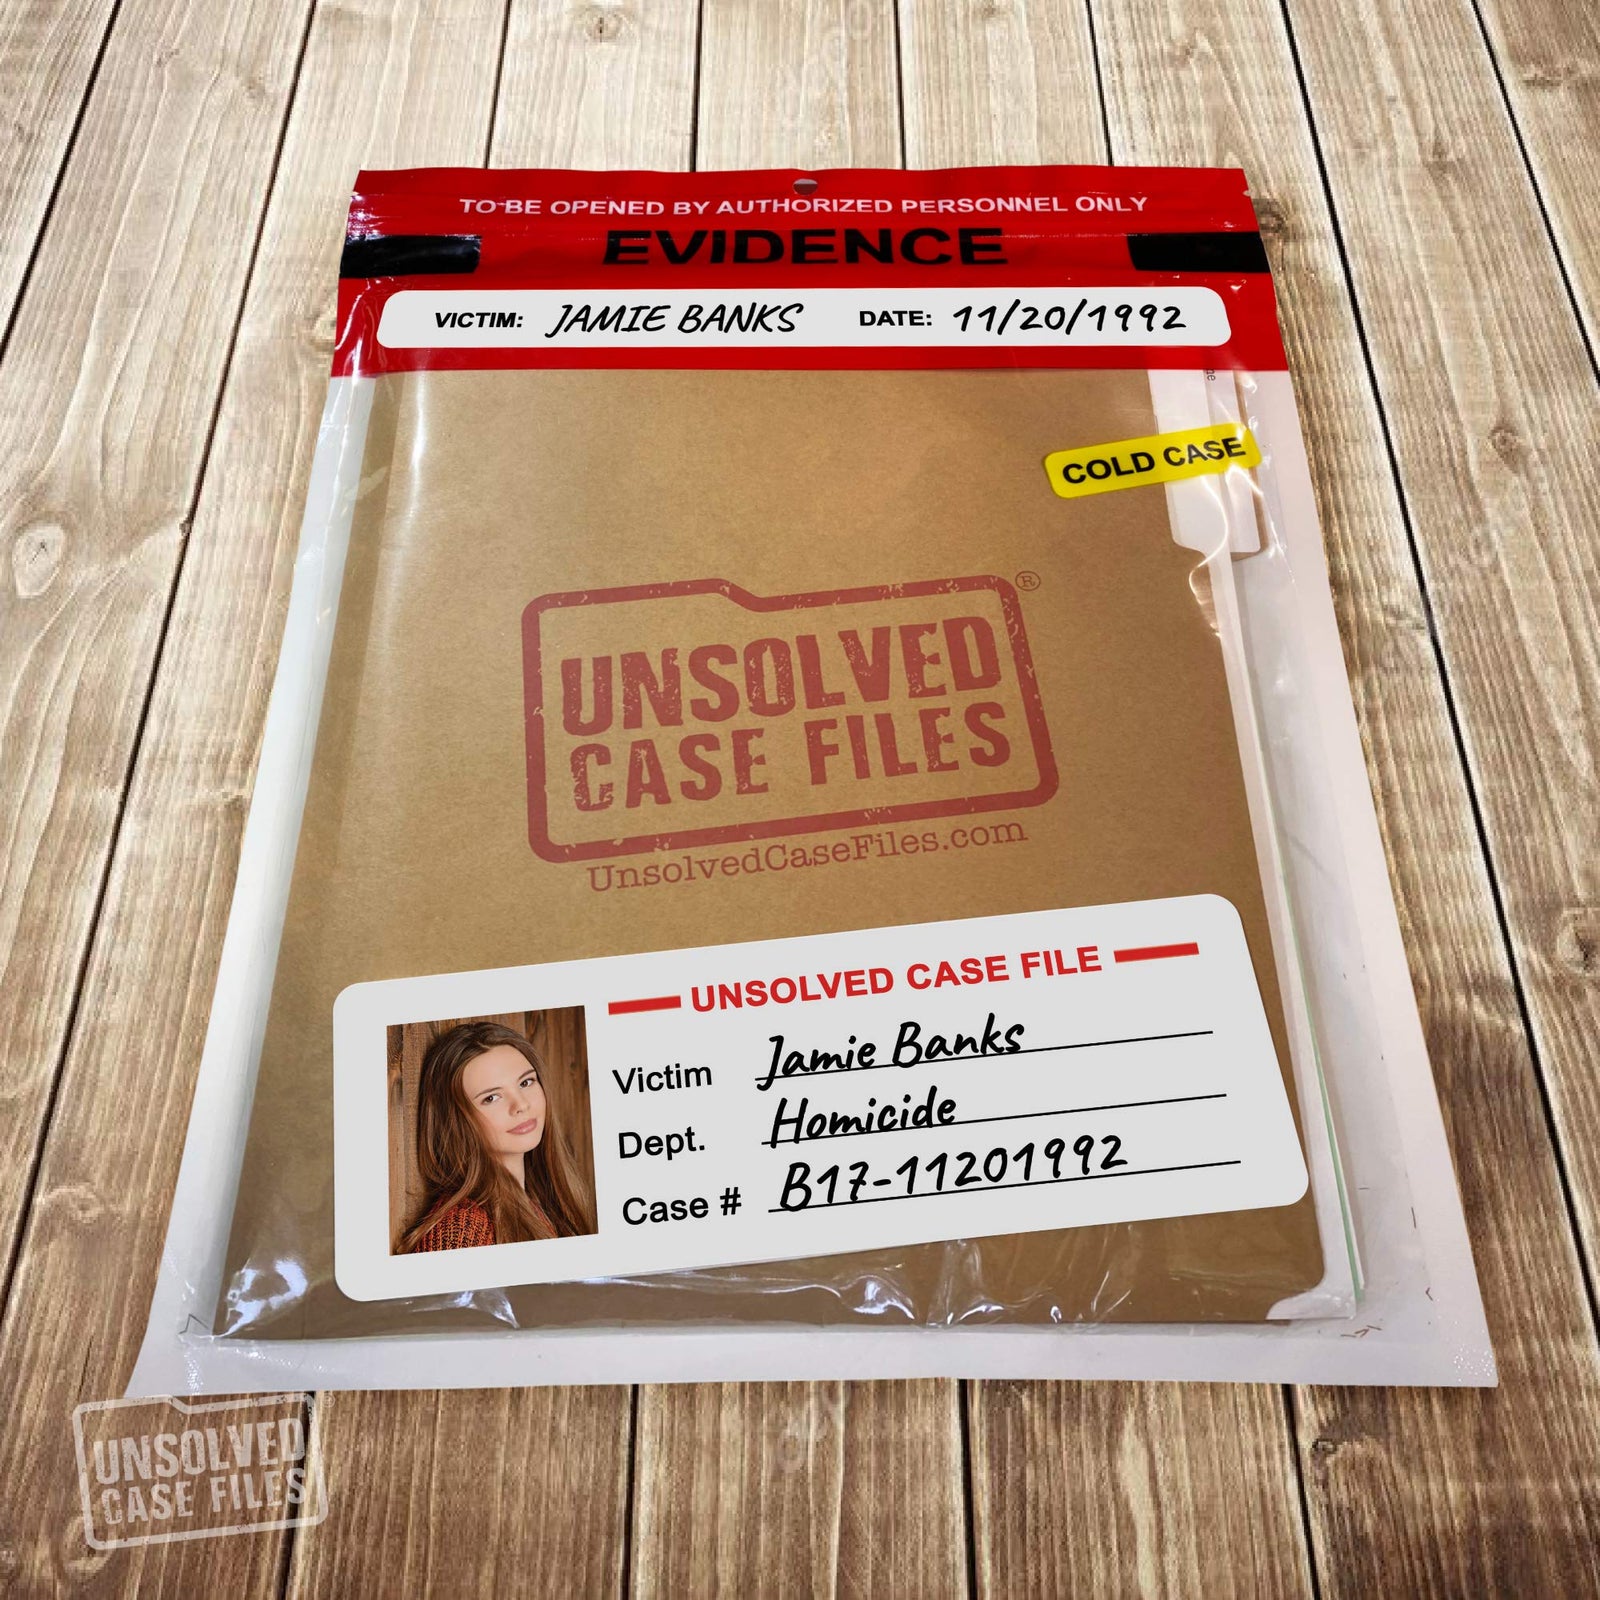 UNSOLVED CASE FILES | Banks, Jamie - Cold Case Murder Mystery Game | Can You Solve The Crime?